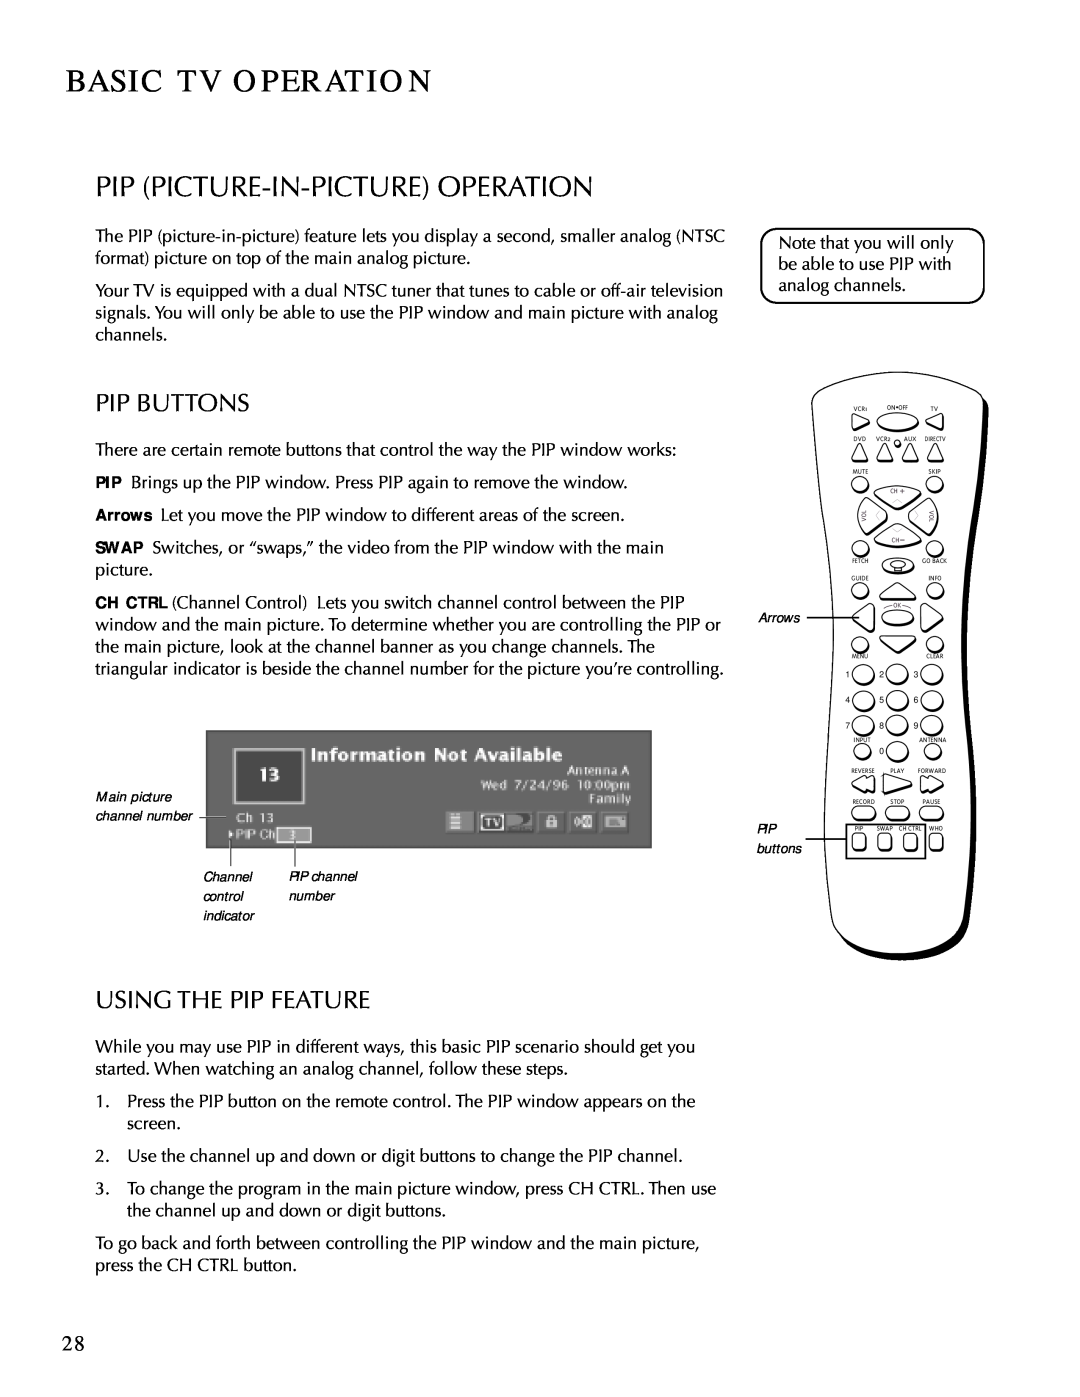 DirecTV HDTV user manual Pip Picture-In-Picture Operation, Pip Buttons, Using The Pip Feature, Basic Tv Operation 